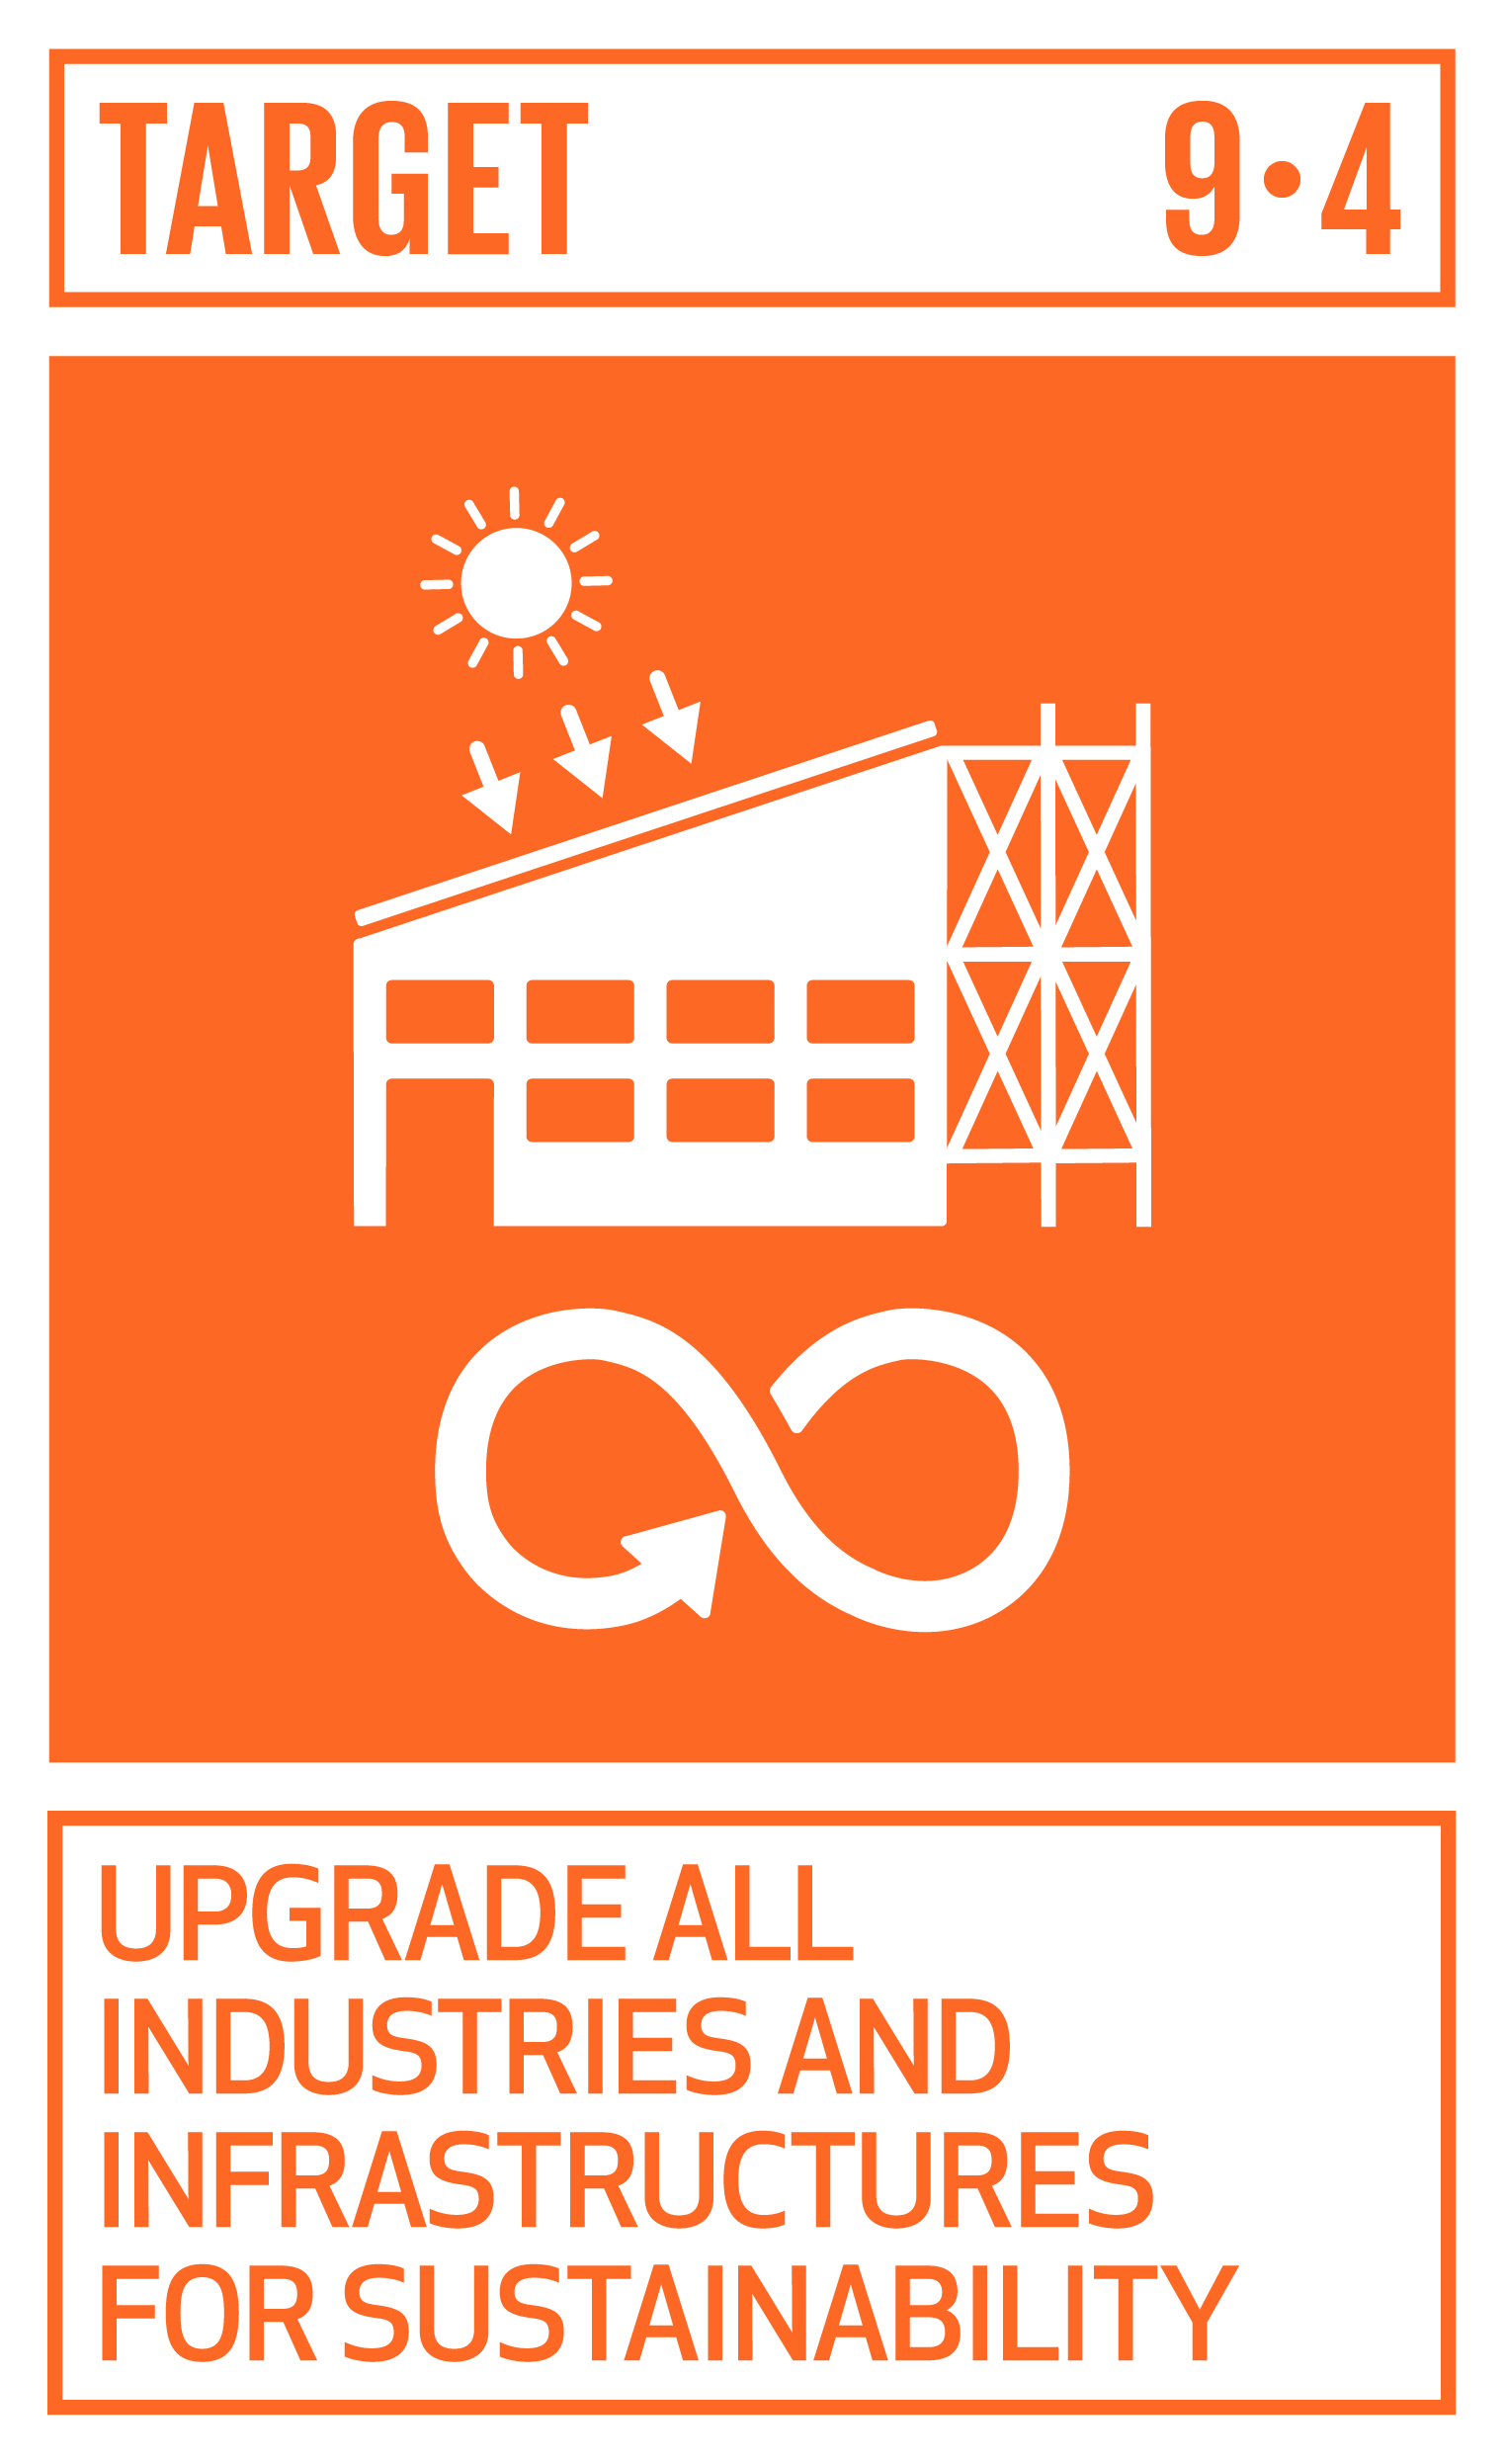 https://ocm.iccrom.org/sdgs/sdg-9-industry-innovation-and-infrastructure/sdg-94-upgrade-all-industries-and-infrastructures